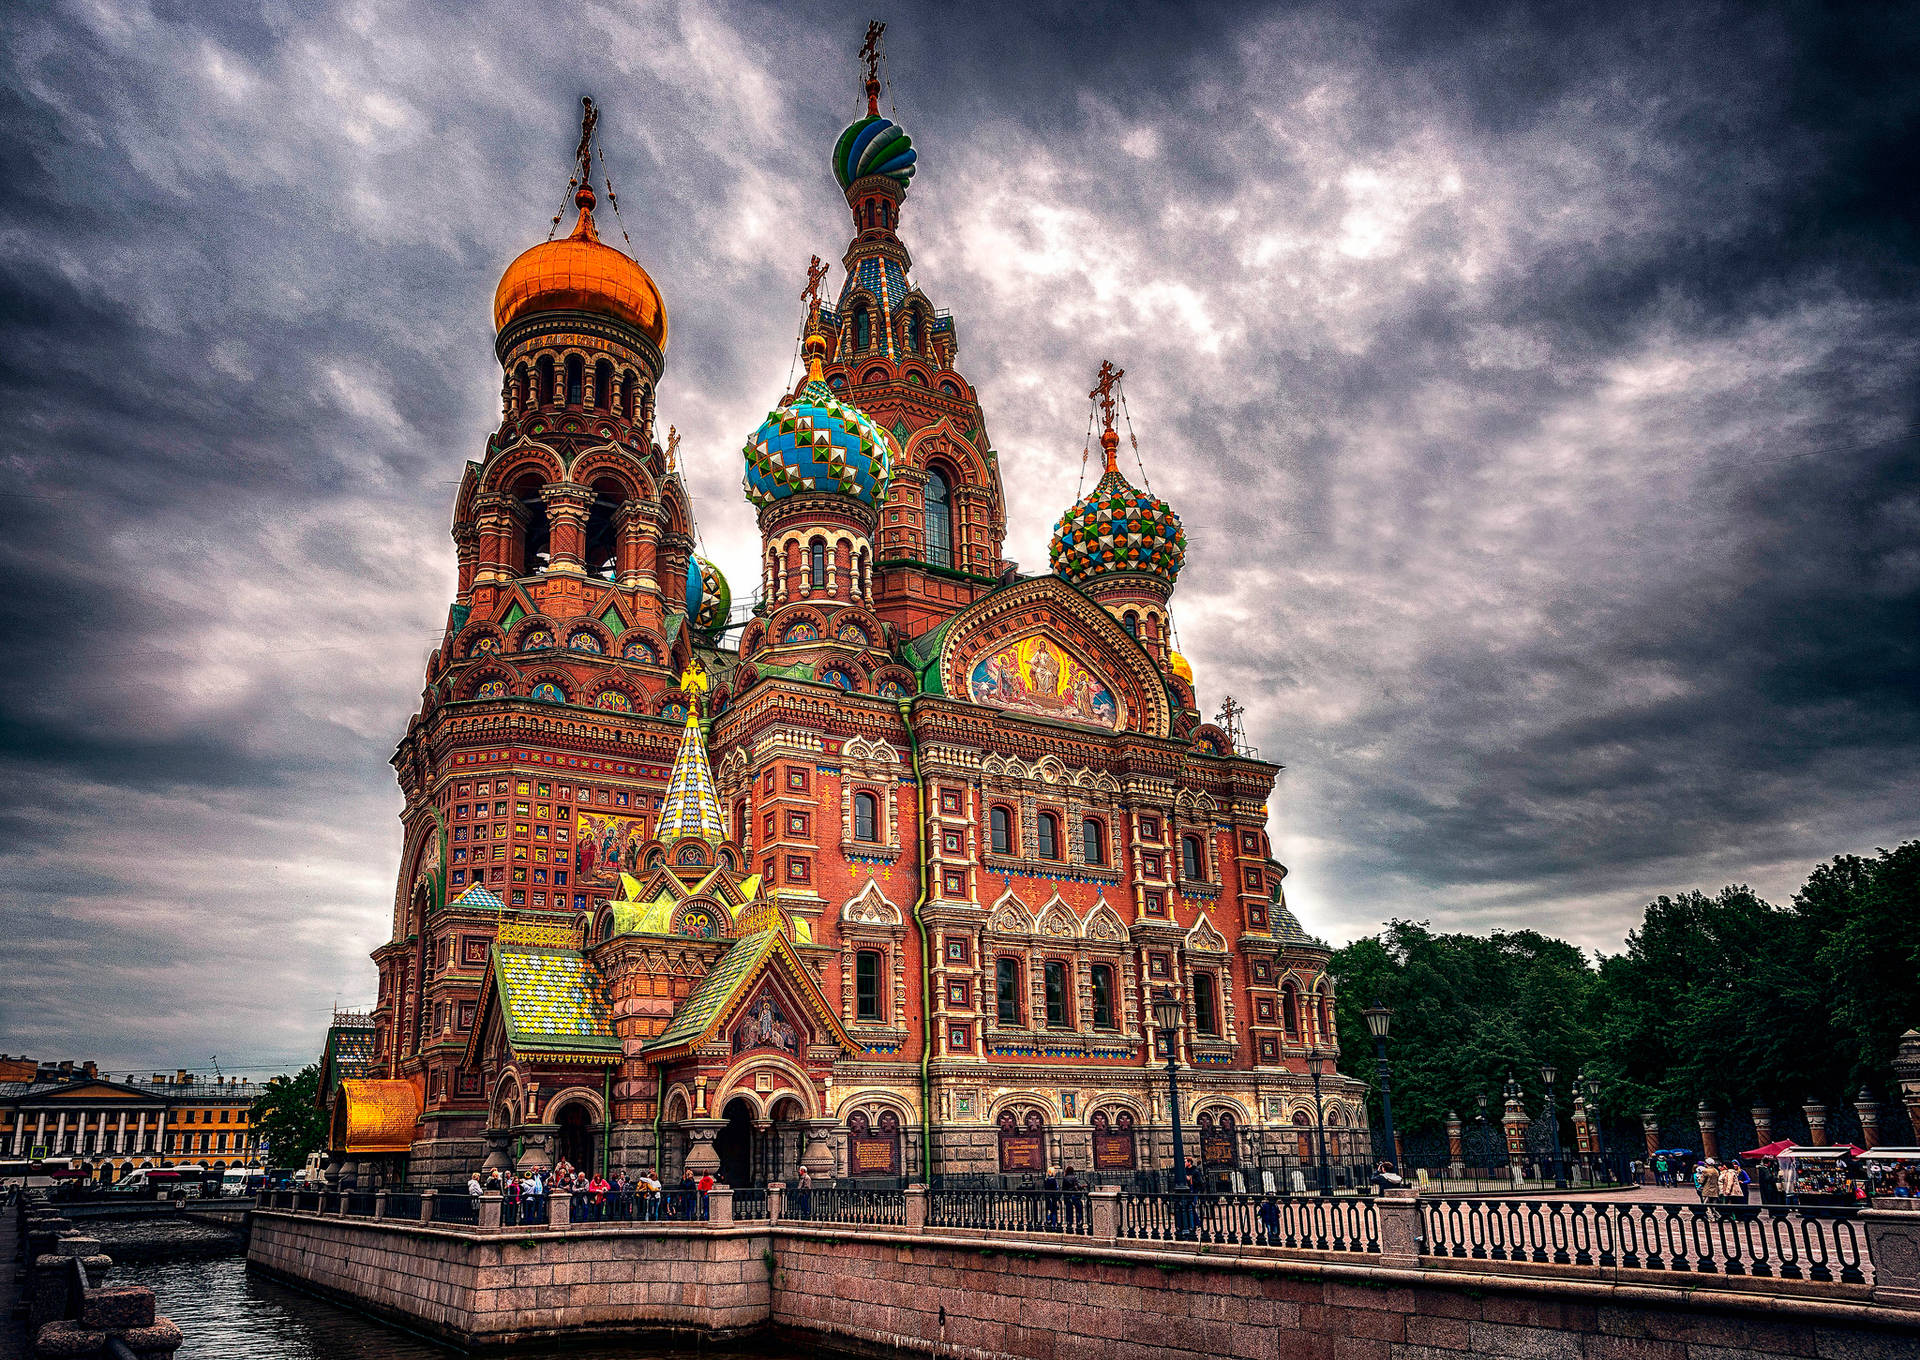 Majestic view of the Savior on Spilled Blood, a monumental symbol of Russian heritage. Wallpaper